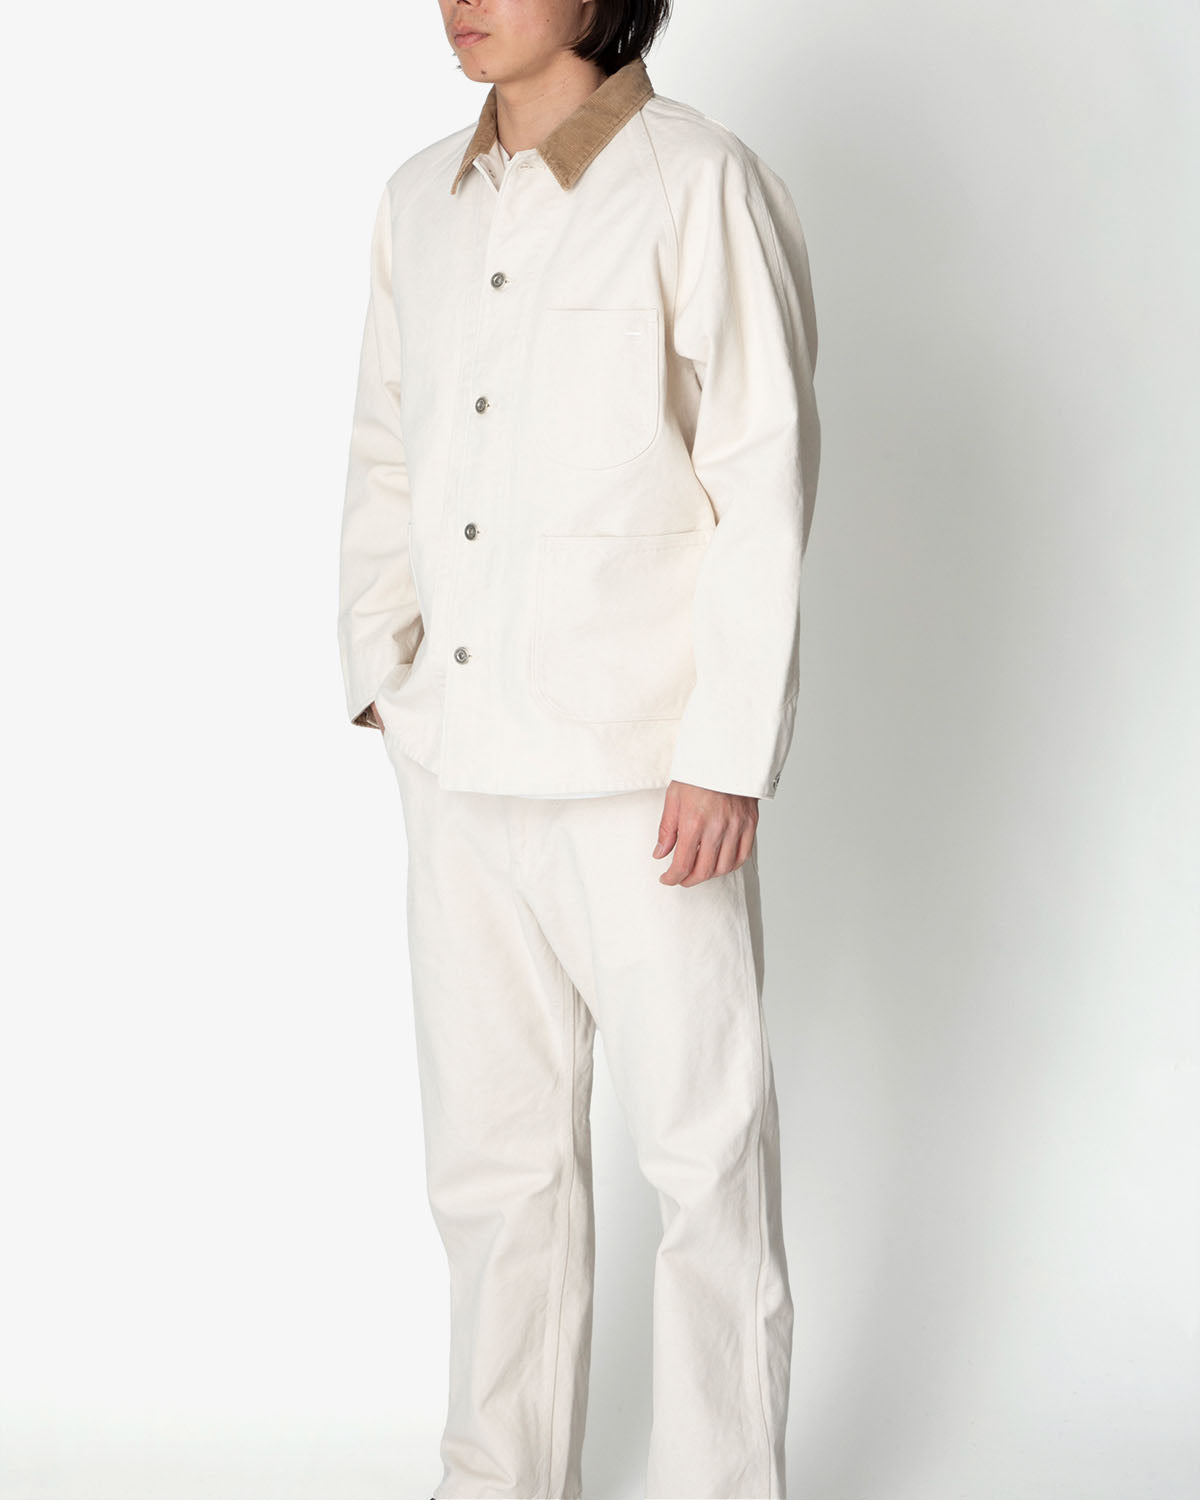 HALFTEN COVERALL